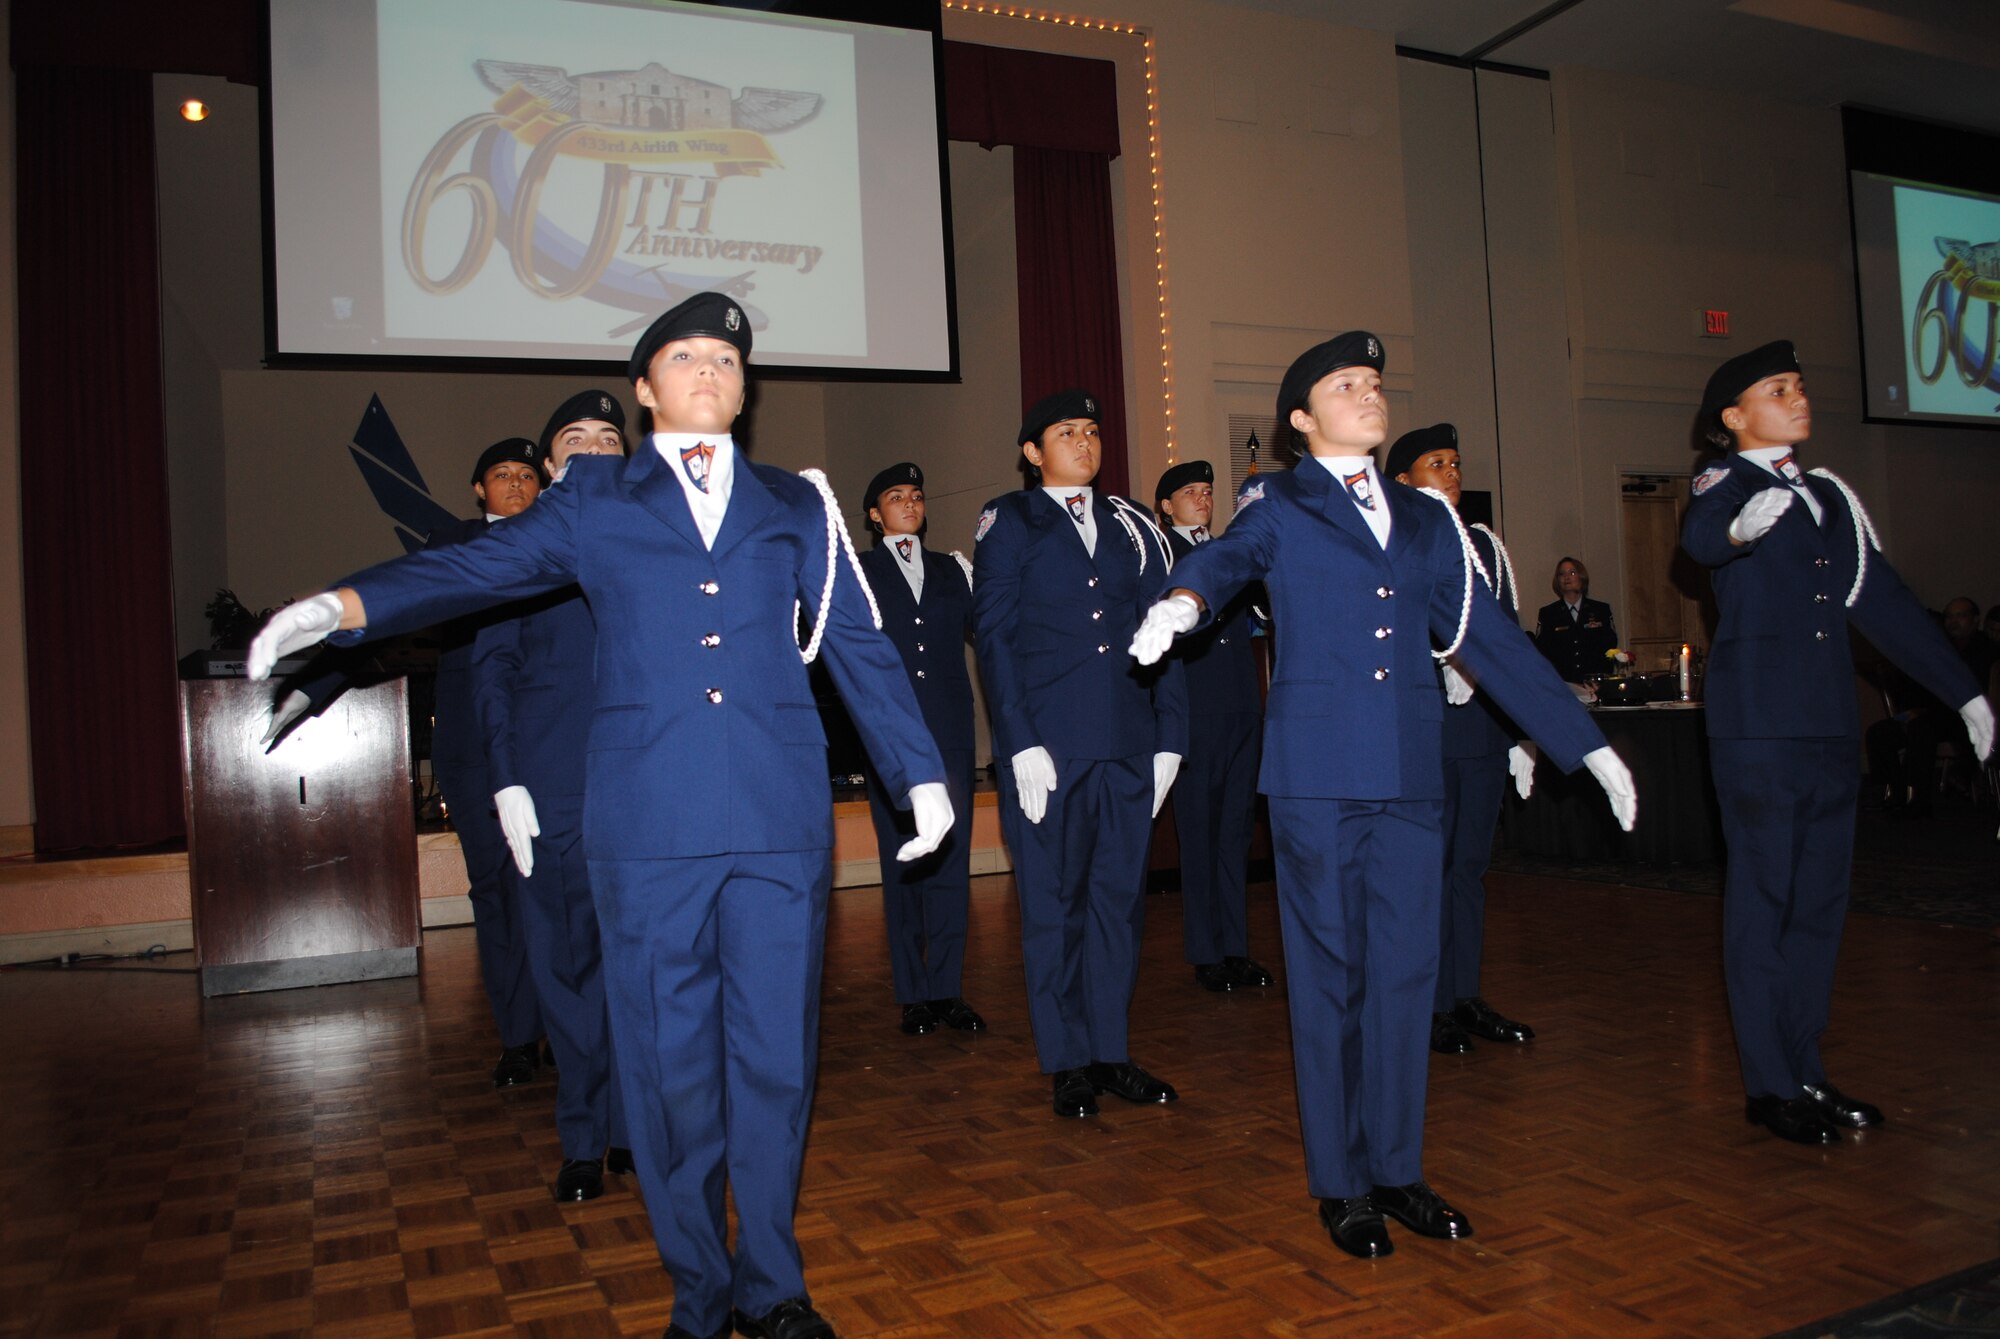 Brandeis High School unarmed, all-female Air Force Junior ROTC drill team, the Blue Aces, treat guests to a  precious military drill demonstration during the 433rd Airlift Wing 60th Anniversary Dinner held Sept. 10, 2011, at the Gateway Club on Lackland Air Force Base, Texas. Local San Antonio area group received a standing ovation.  (U.S. Air Force photo/Senior Airman Luis Loza Gutierrez)